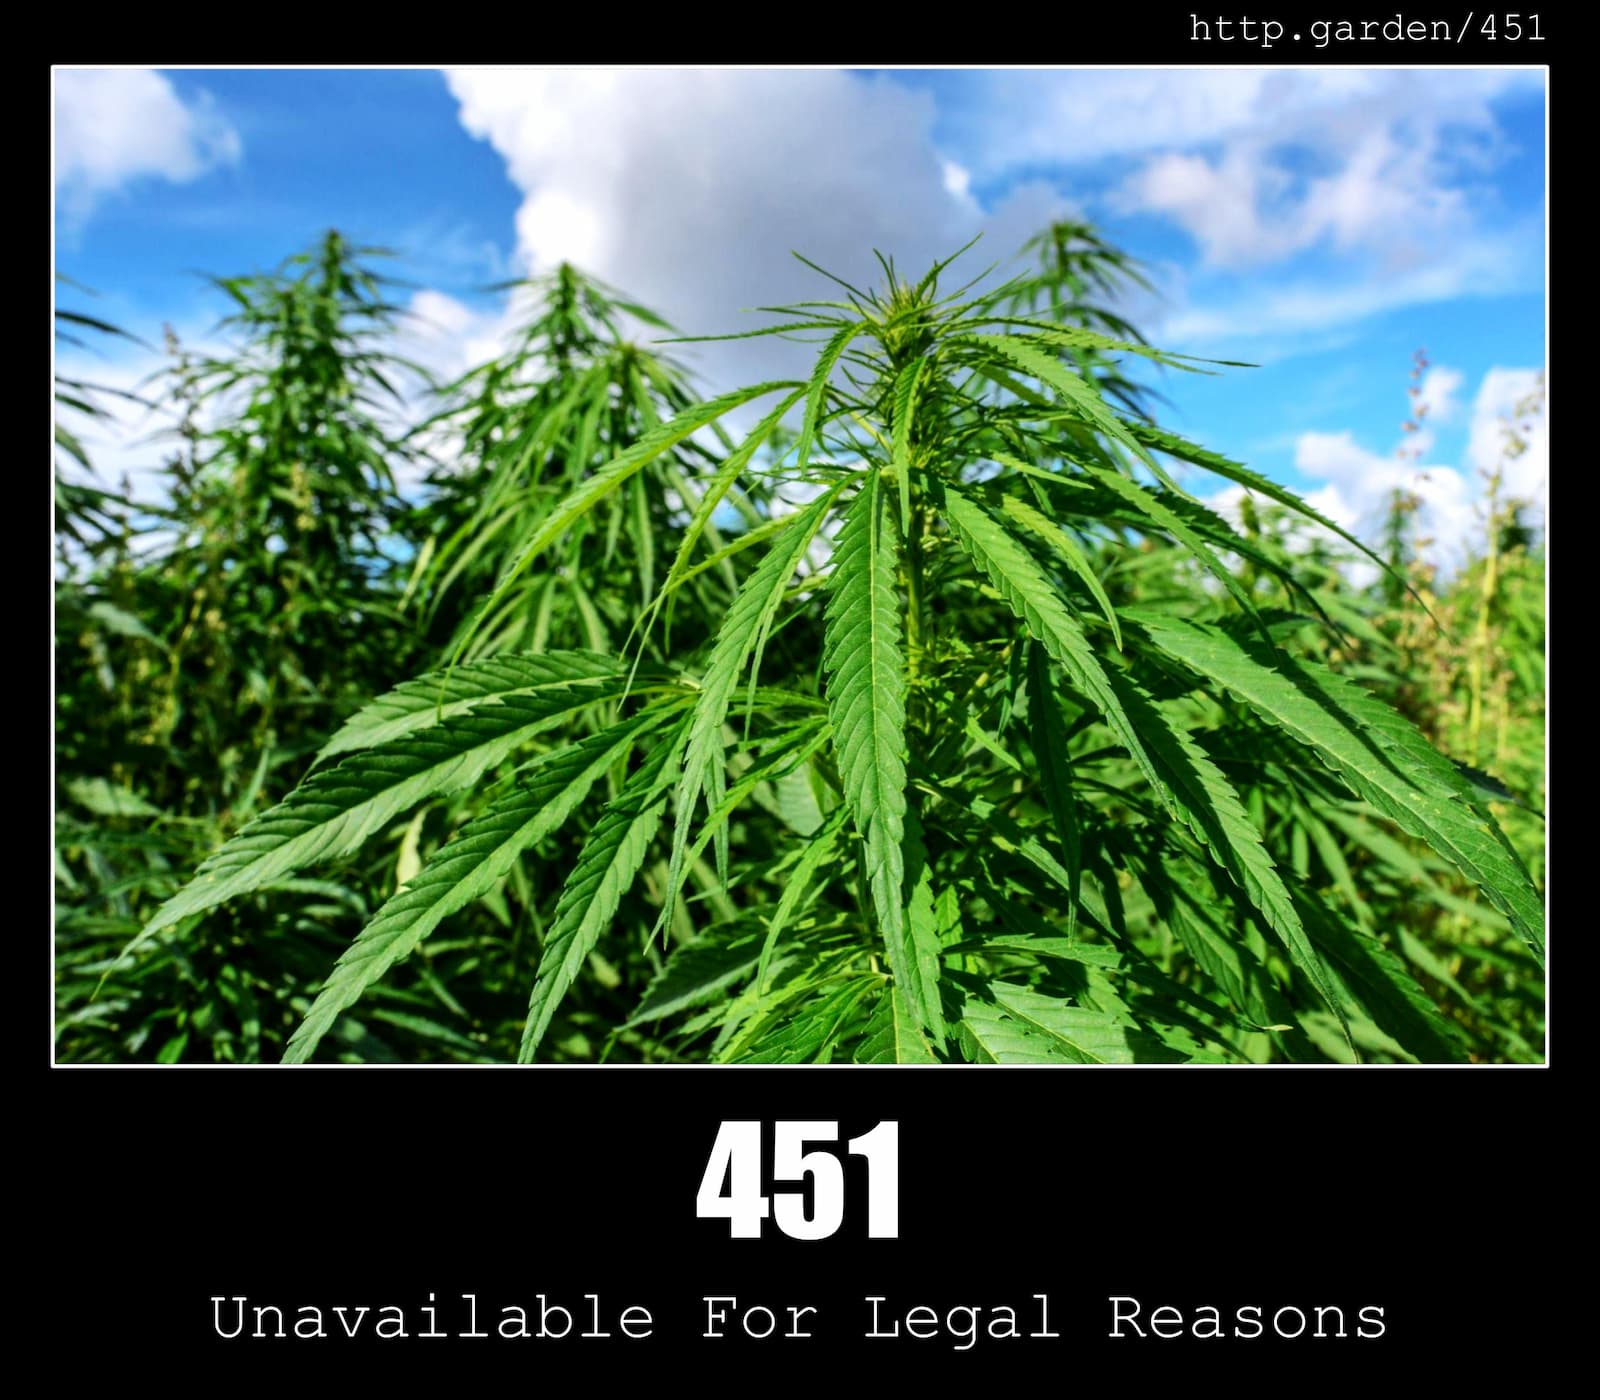 HTTP Status Code 451 Unavailable For Legal Reasons & Gardening